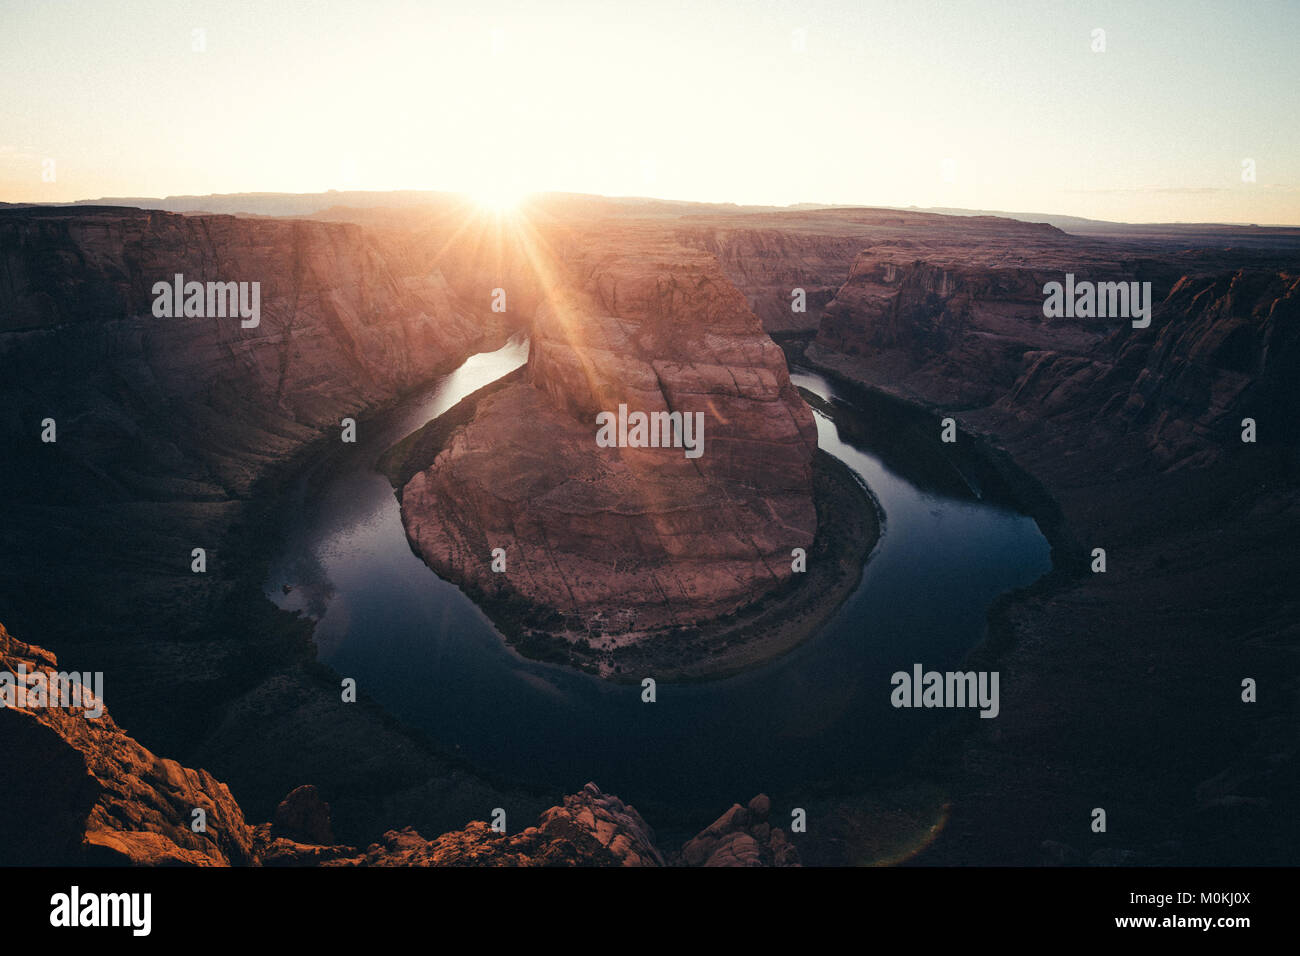 Classic wide-angle view of famous Horseshoe Bend, a horseshoe-shaped meander of the Colorado River located near the town of Page, in beautiful golden  Stock Photo